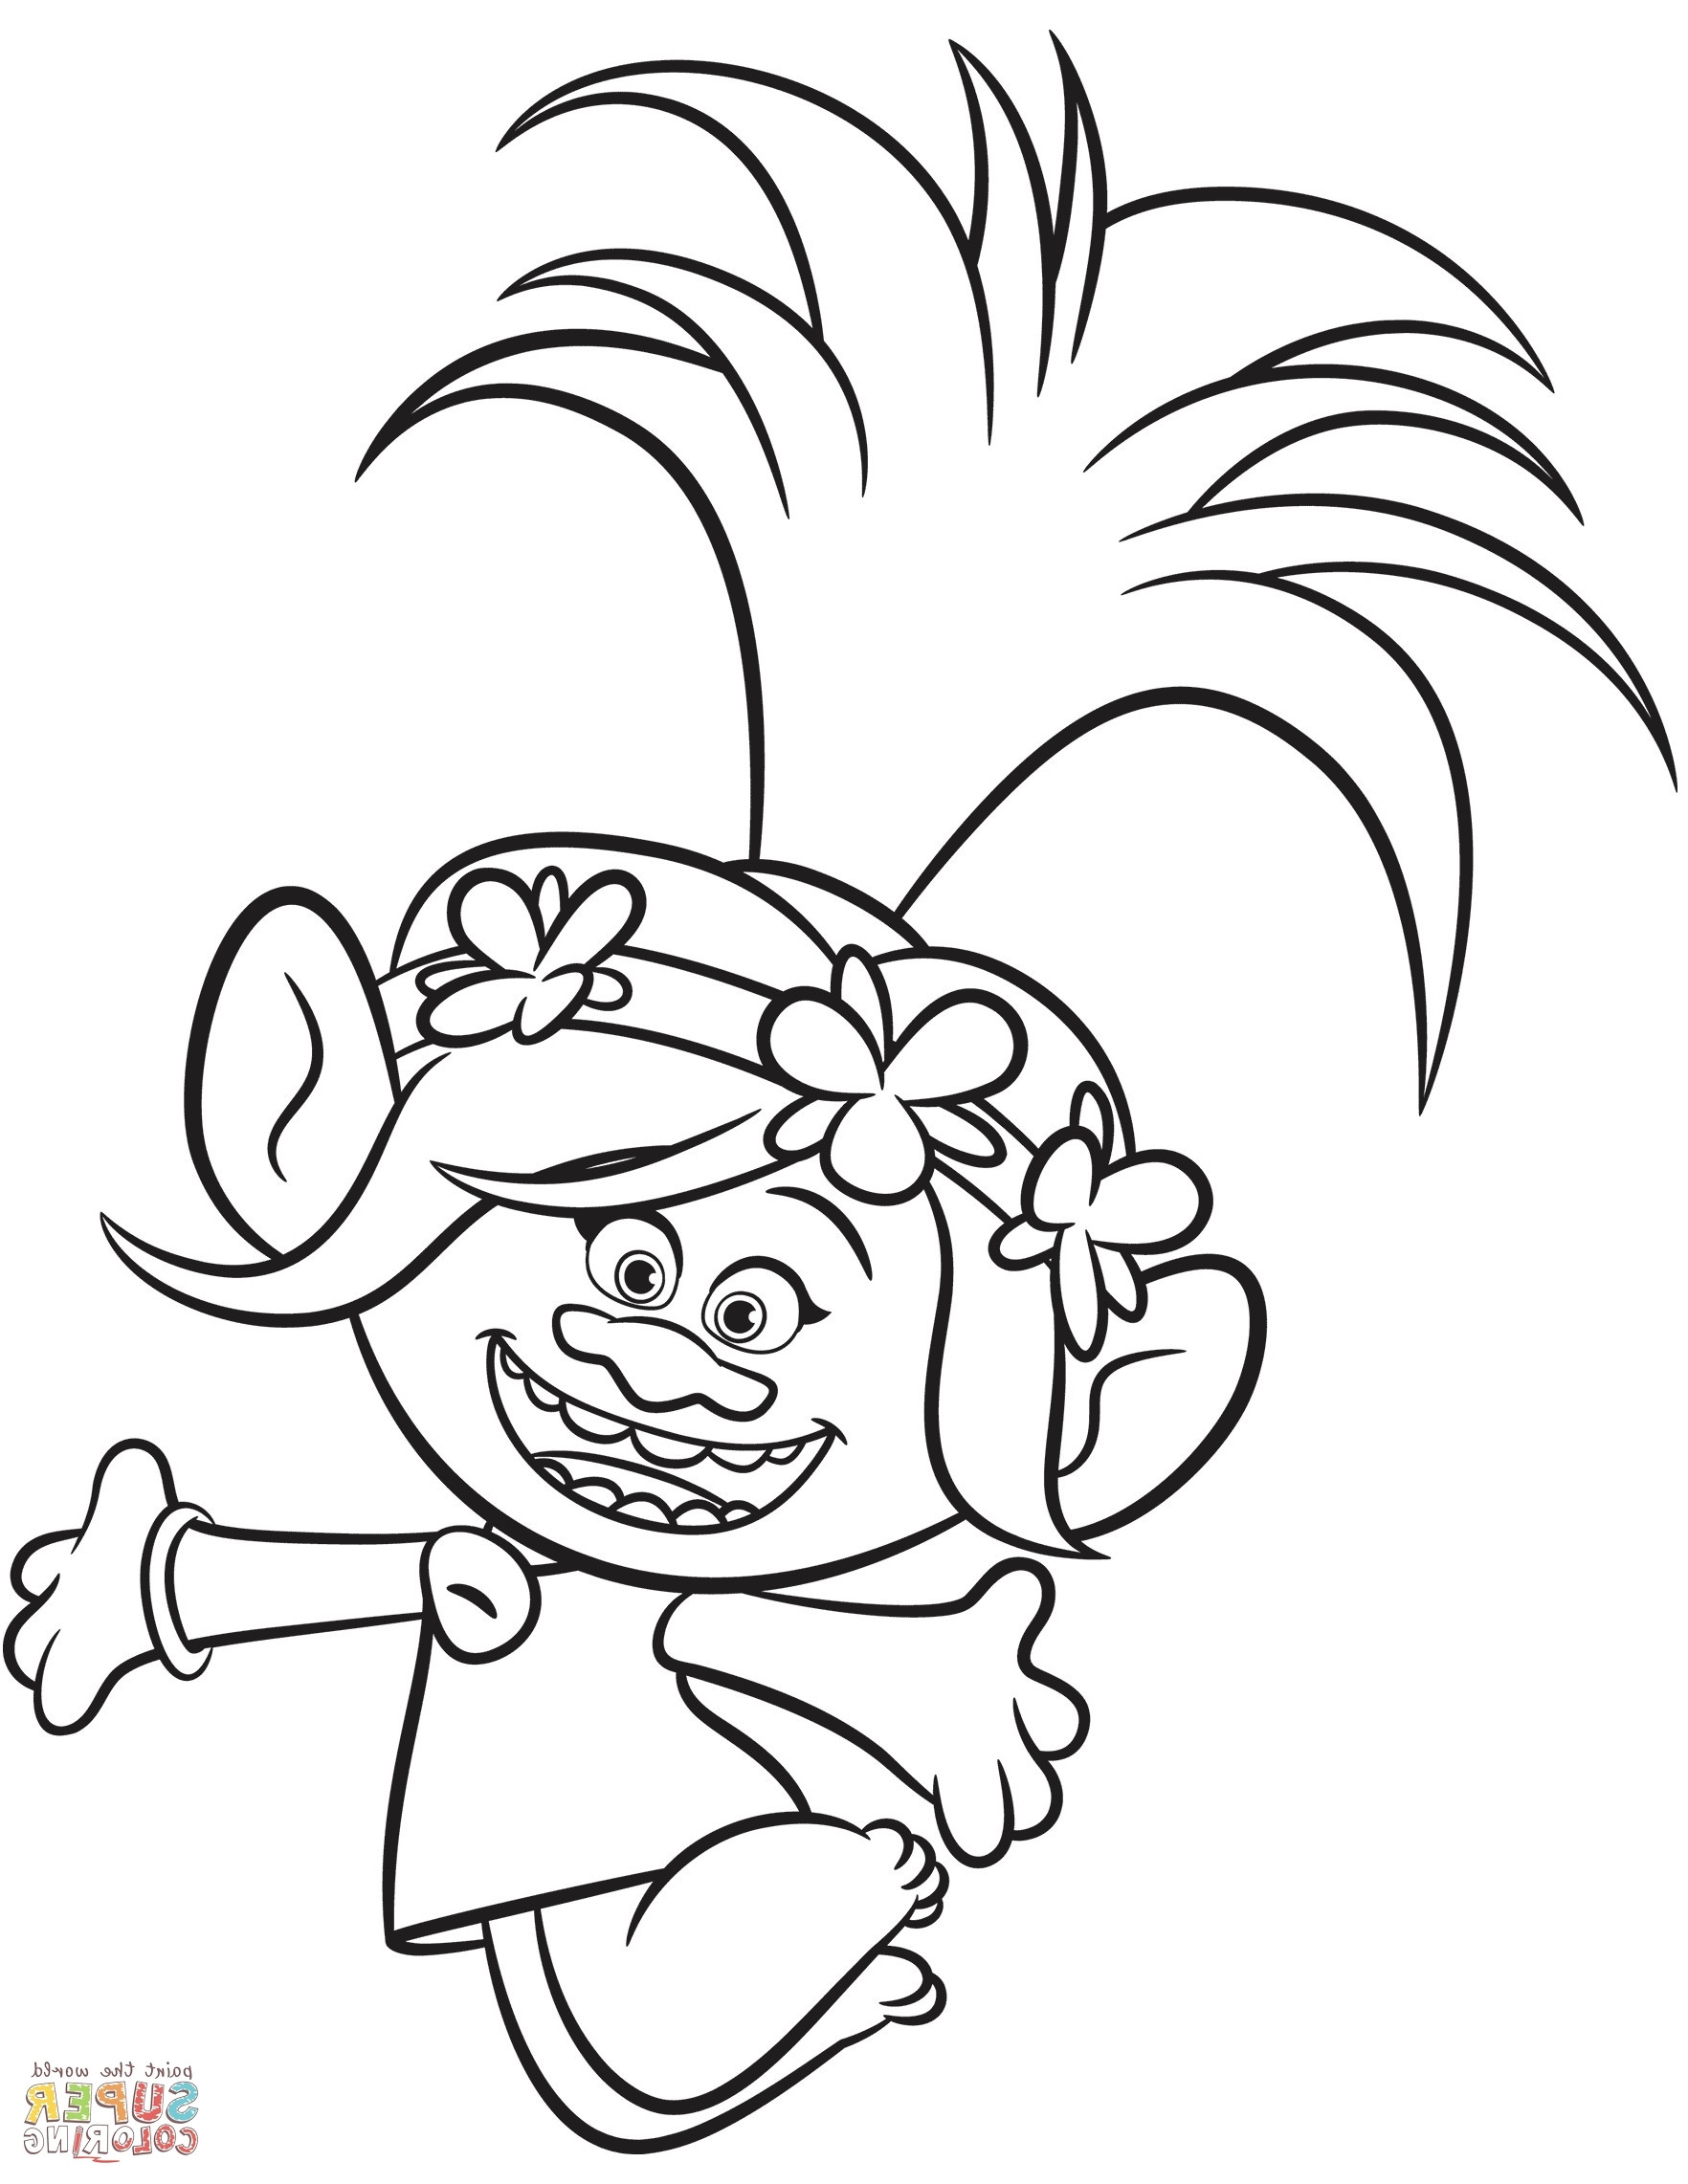 Poppy Trolls Coloring Pages
 Princess Poppy Coloring Pages Download Free Coloring Books